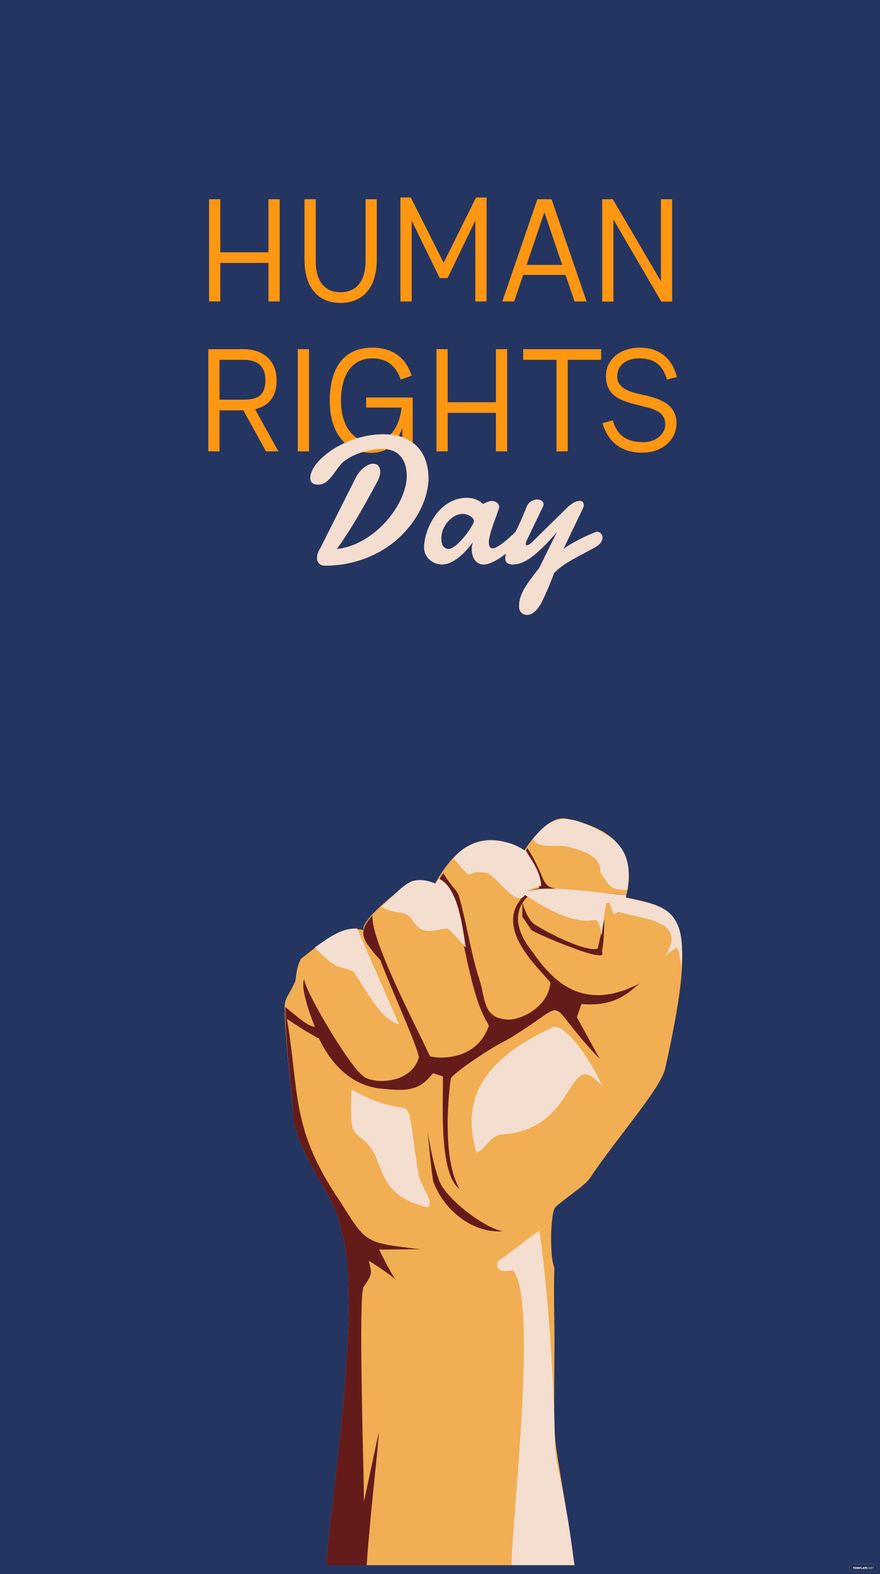 Human Rights Day iPhone Background in PDF, Illustrator, PSD, EPS, SVG, JPG, PNG